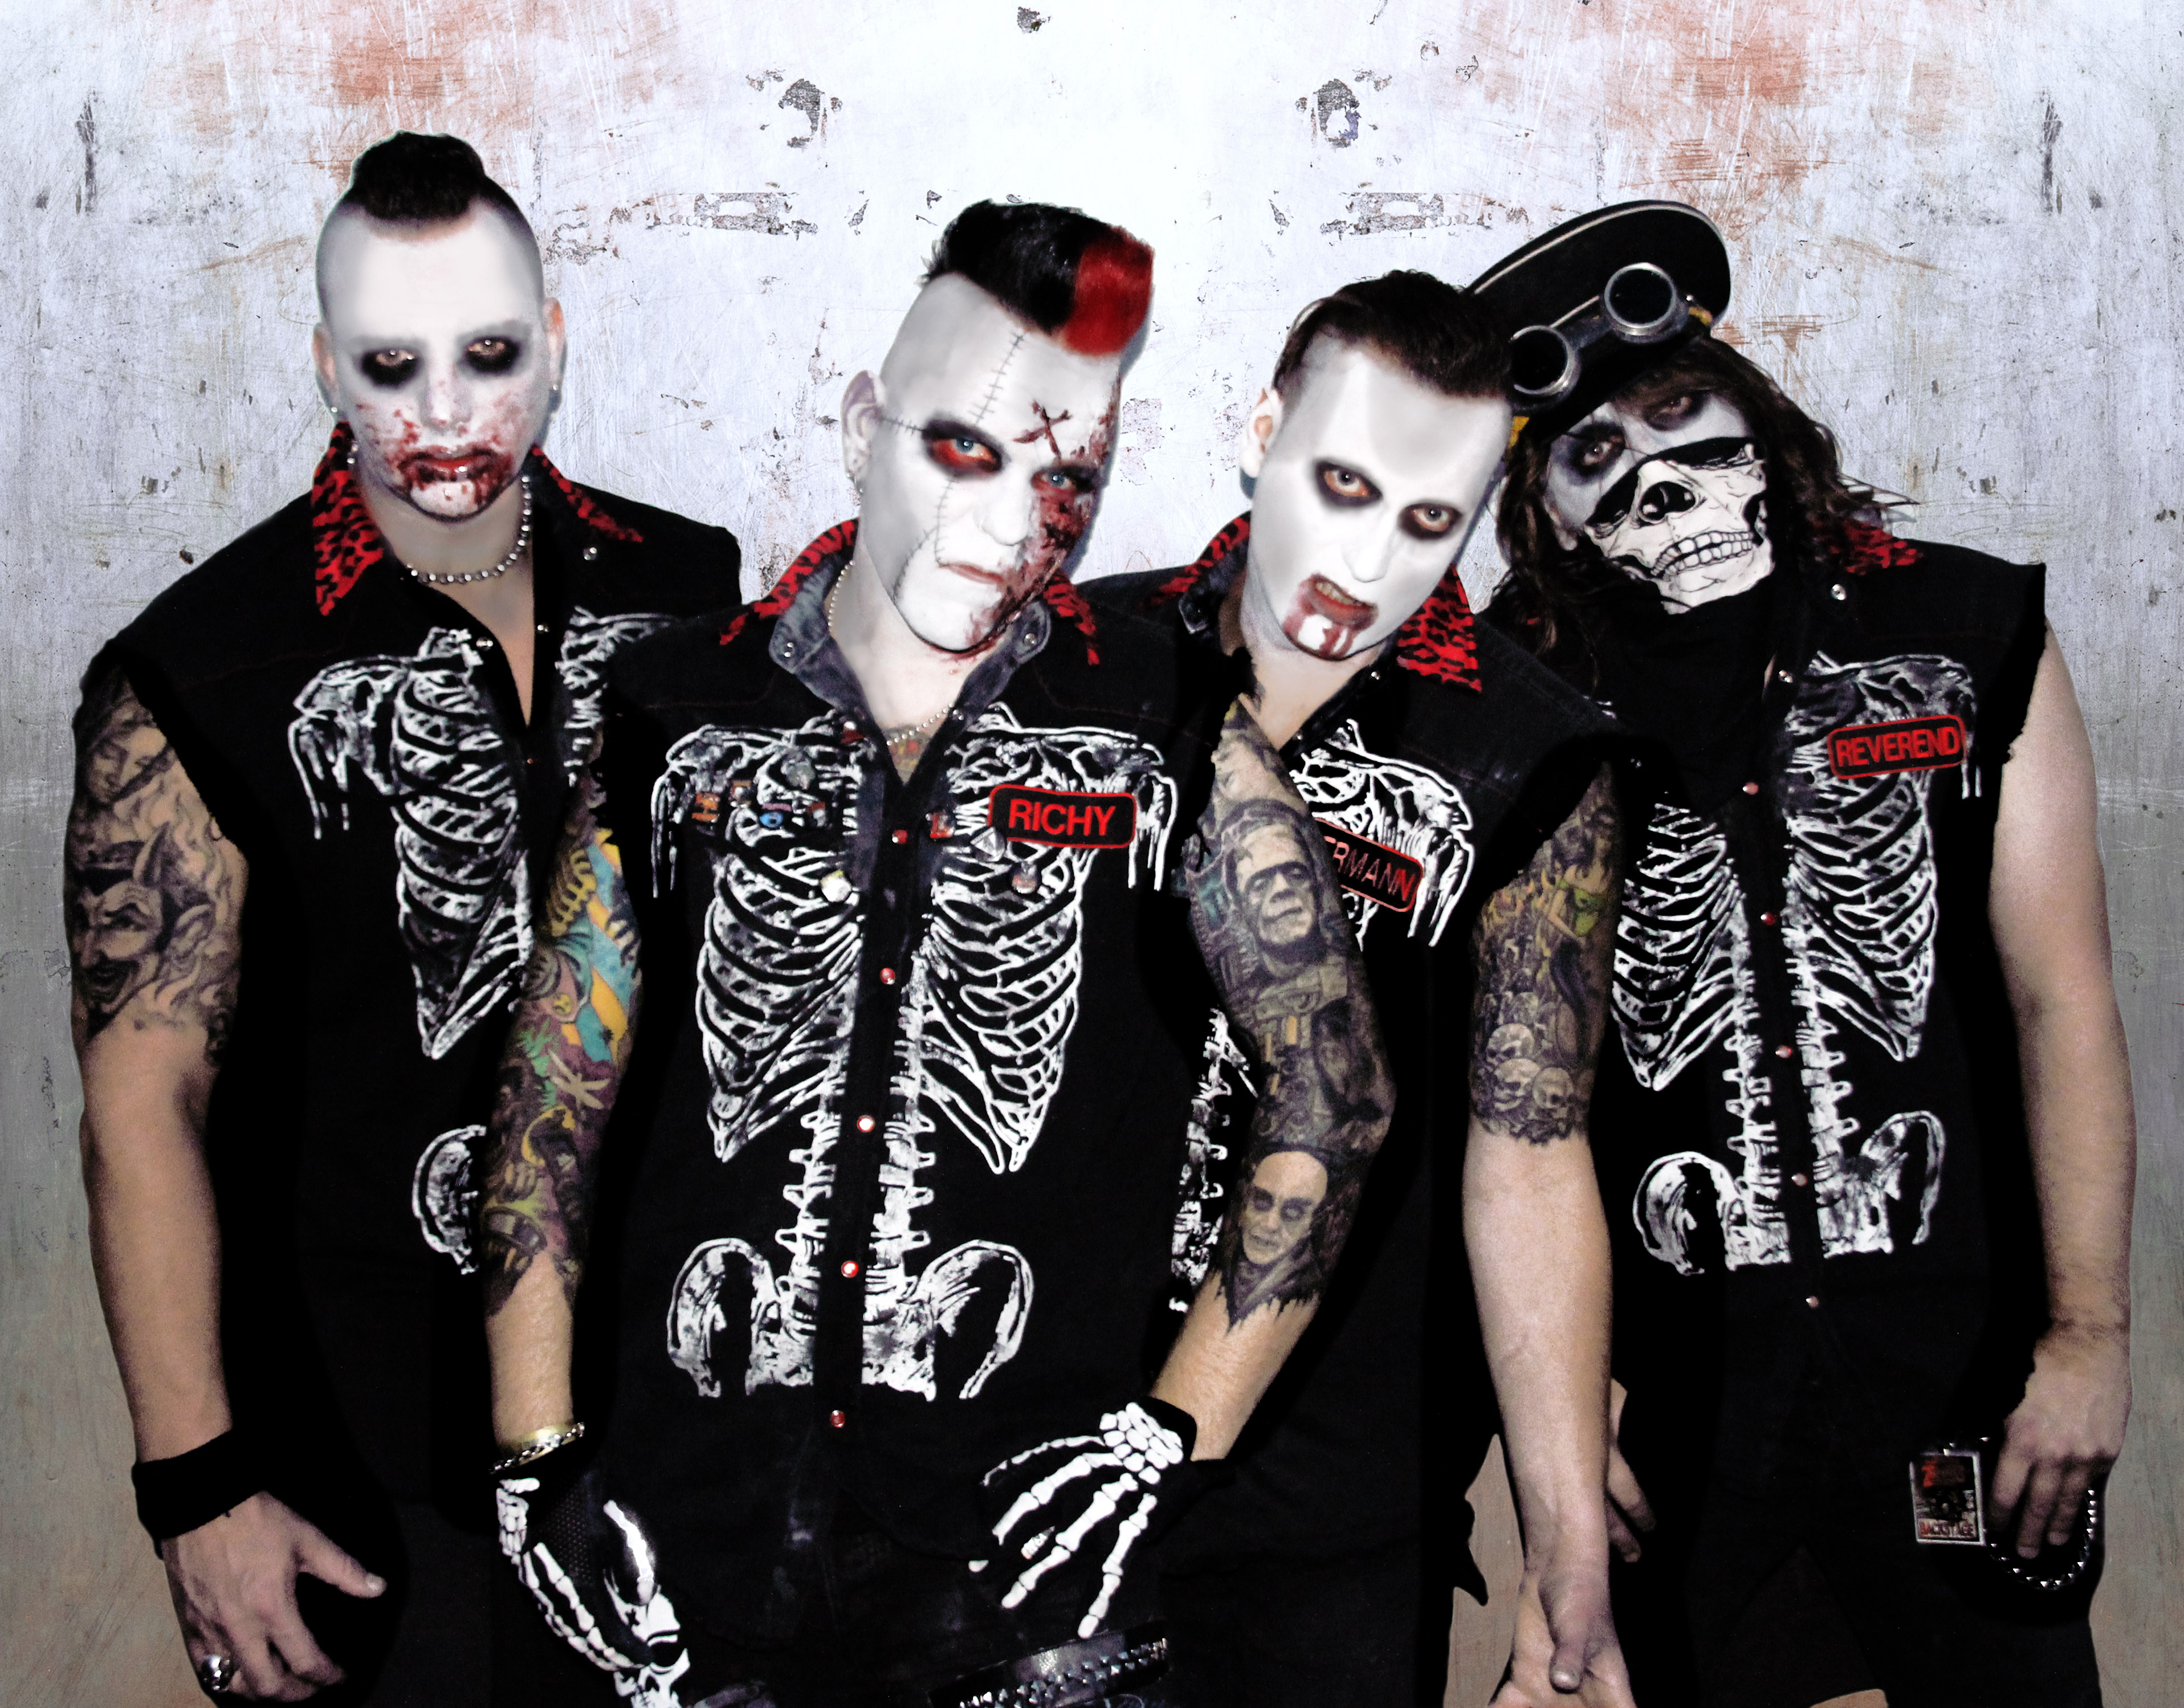 Video of the Day: ‘Radioactive’ by Bloodsucking Zombies from Outer Space